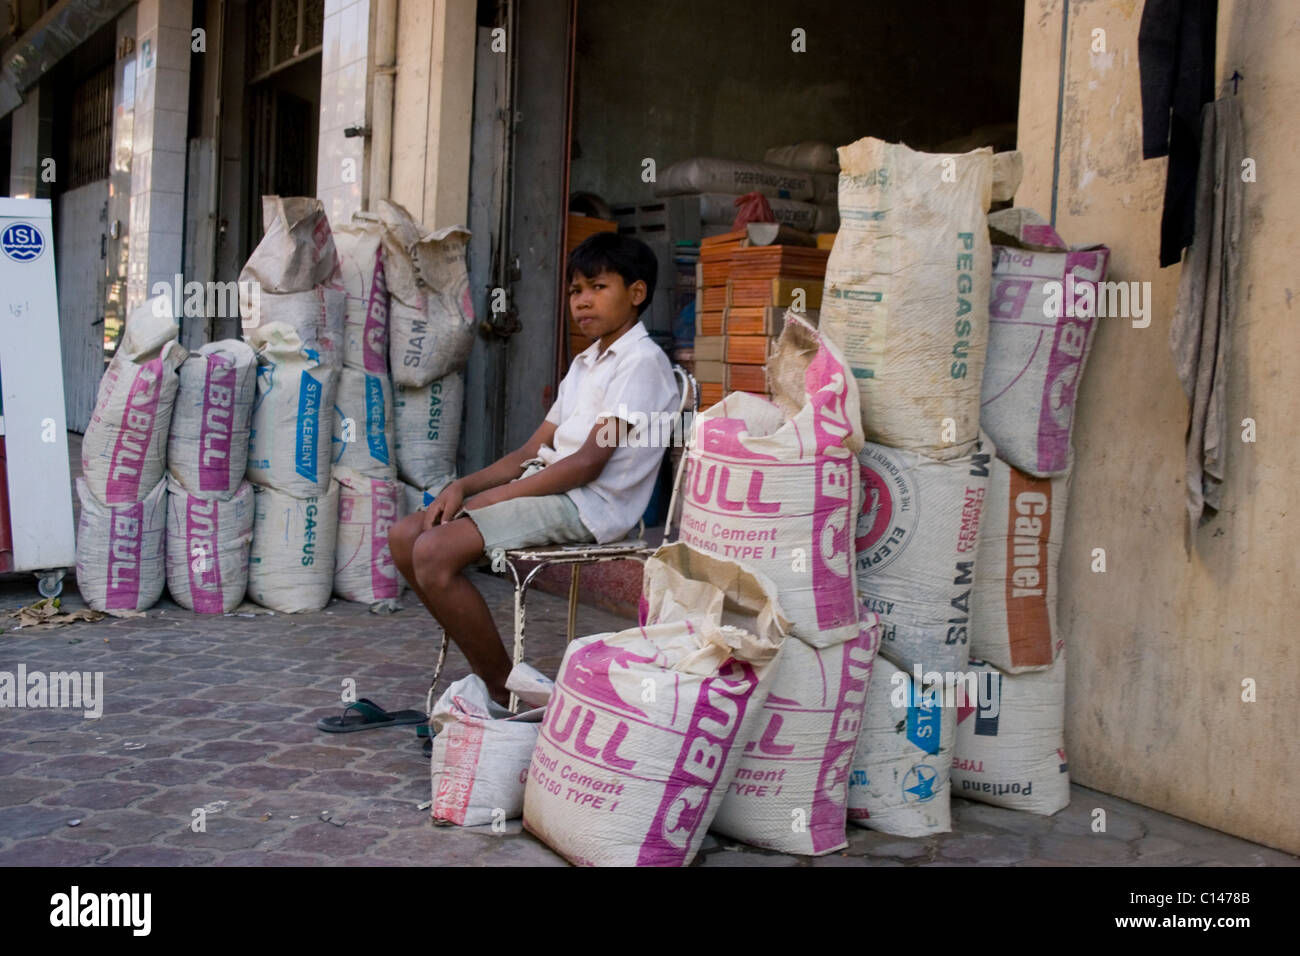 A young child laborer boy is sitting among several cement sacks on a city sidewalk in Phnom Penh, Cambodia. Stock Photo